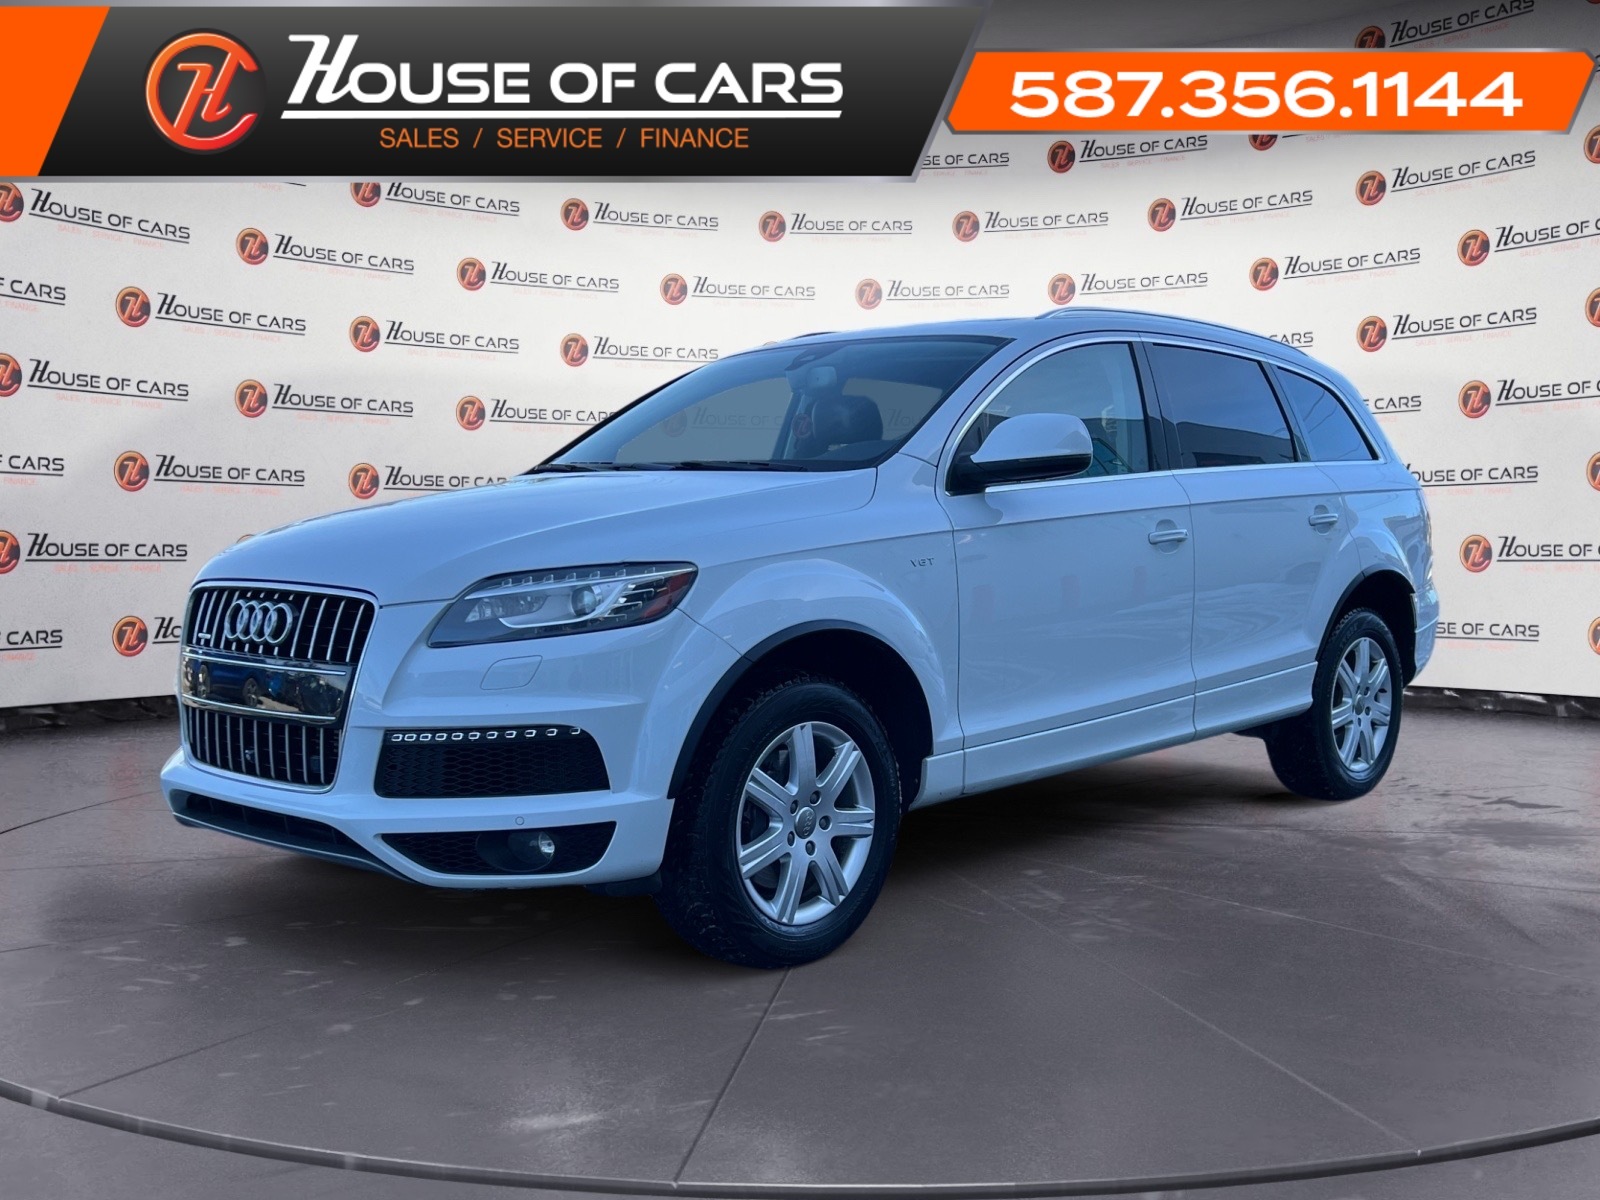 2015 Audi Q7 Sport w/ SUPERCHARGED, Panoramic Sunroof, 7 Seats 